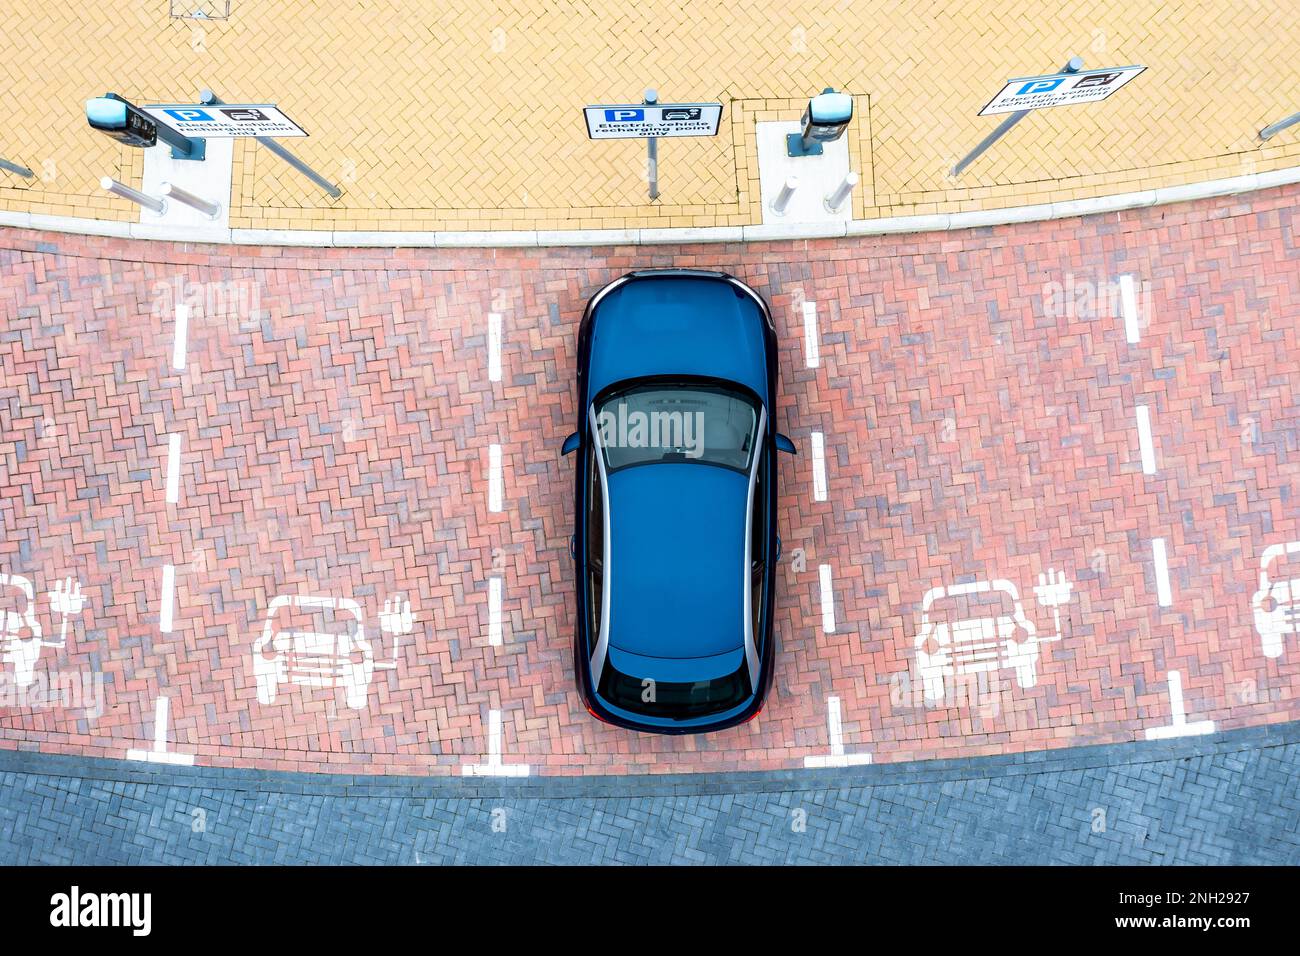 Aerial view directly above an electric vehicle charging station with parking spaces and road markings denoting charging bays Stock Photo